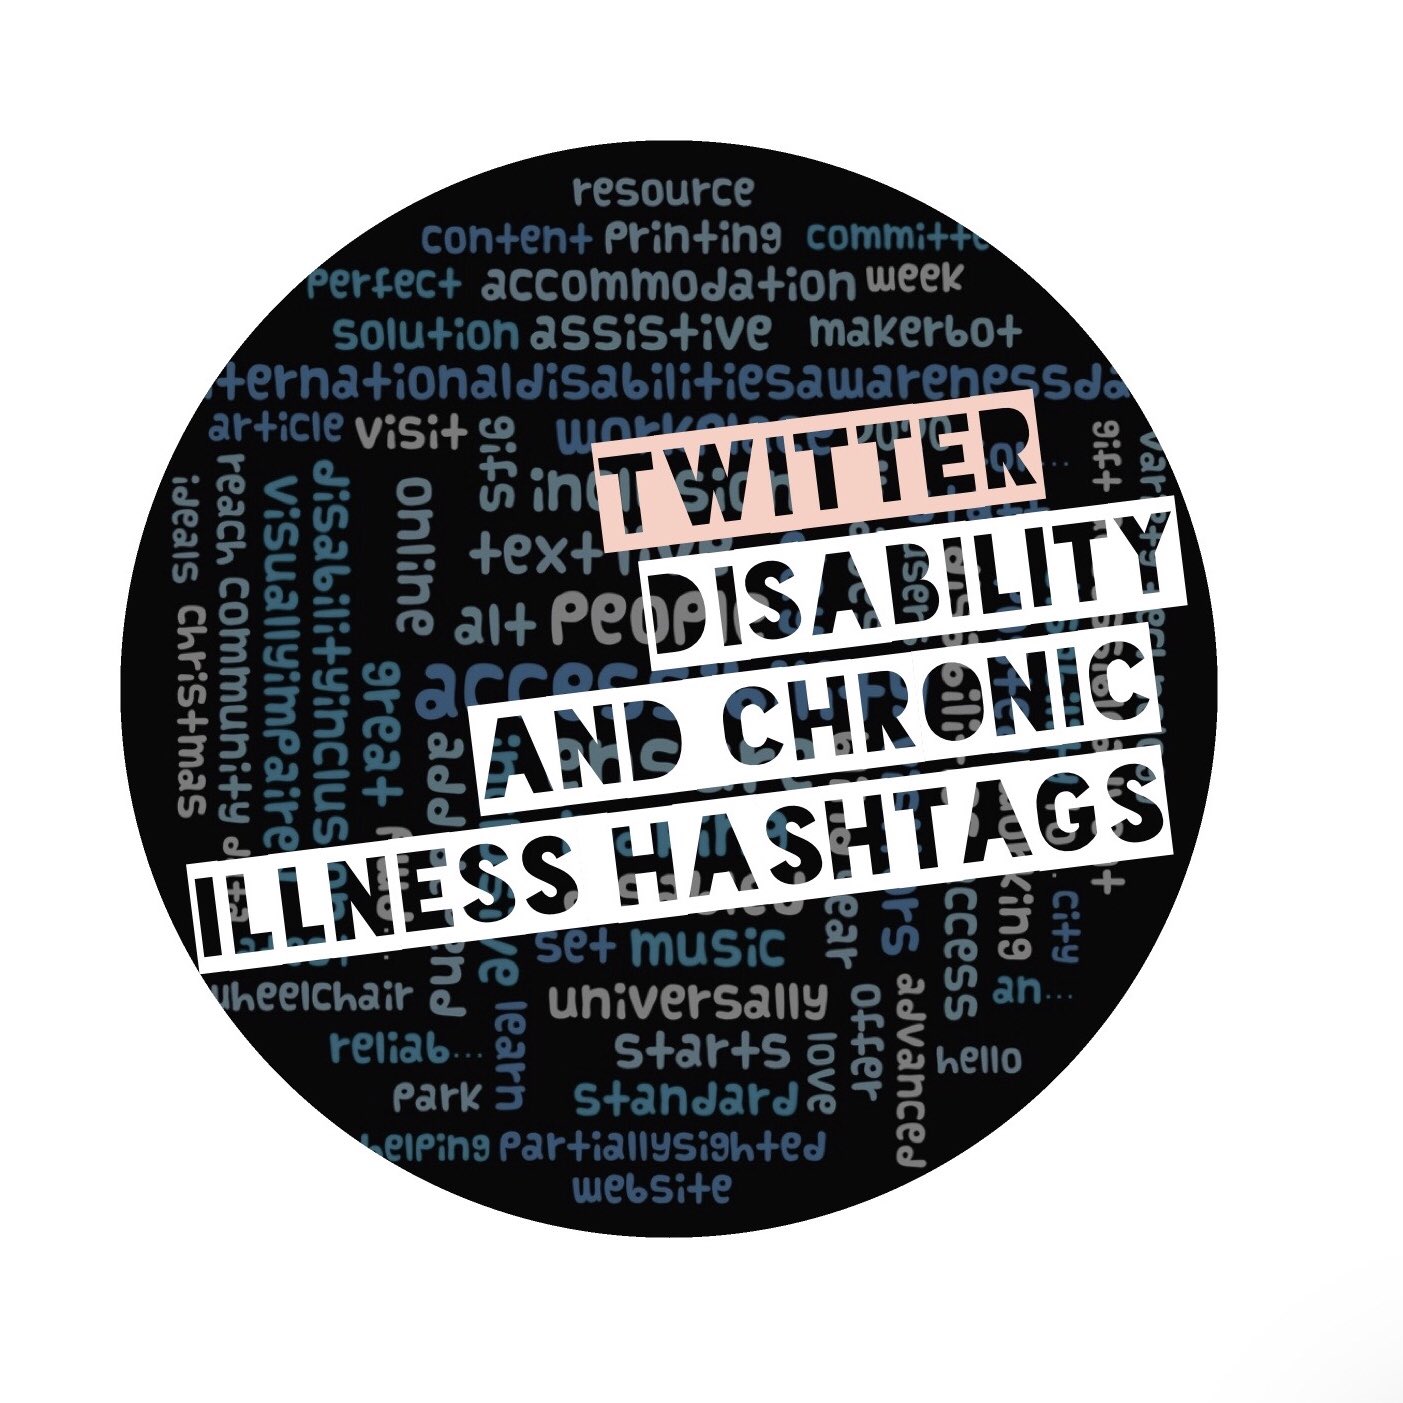 Patient Facing Hashtags - our first mission